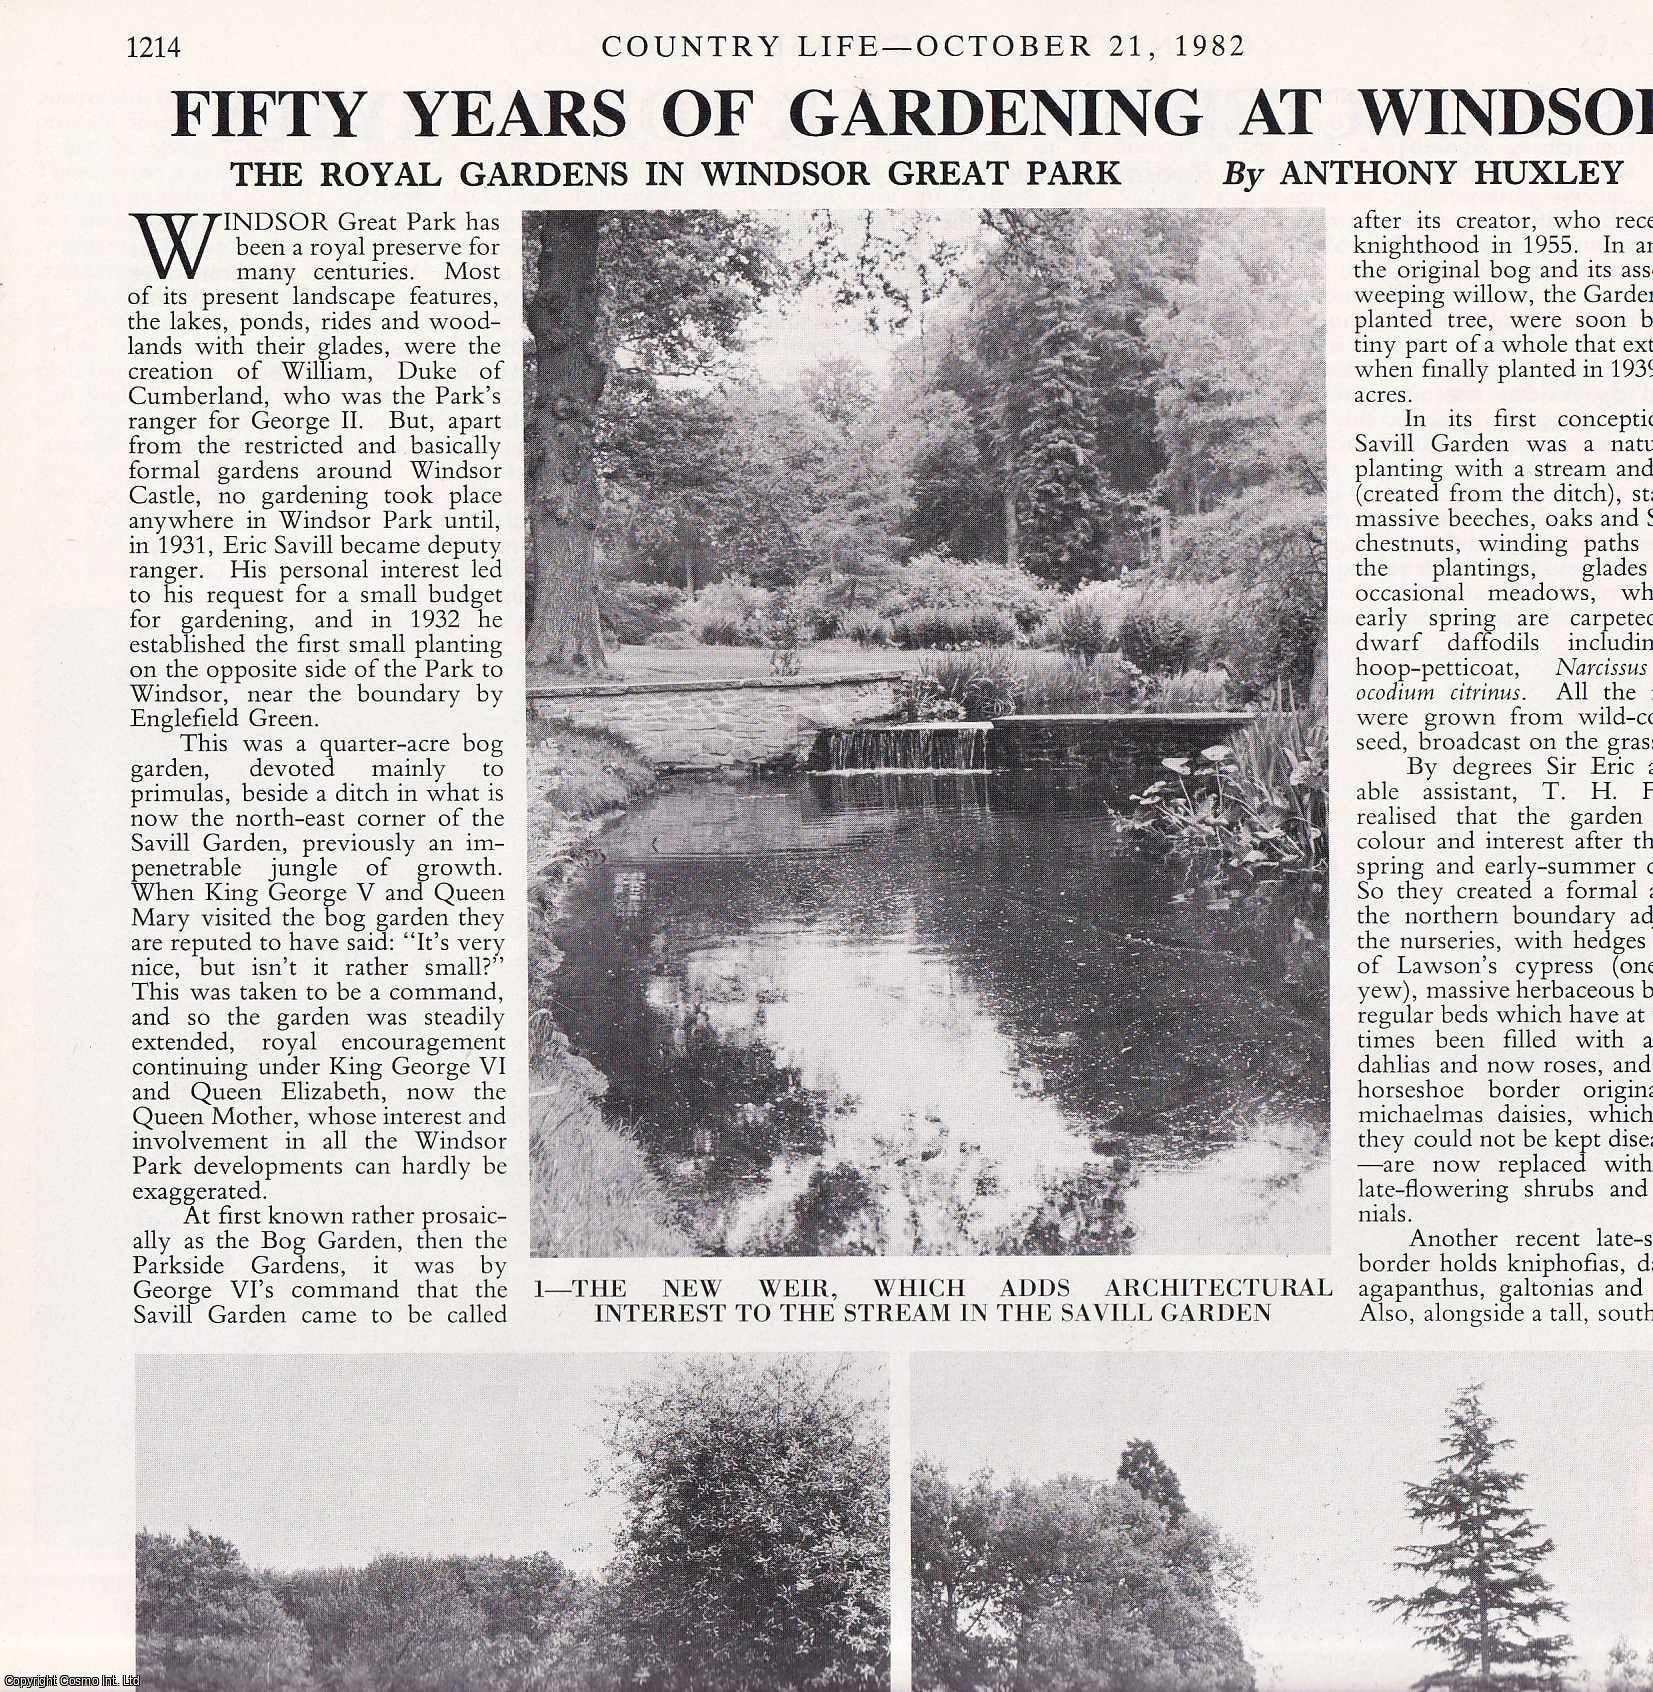 Anthony Huxley - The Royal Gardens in Windsor Great Park. Several pictures and accompanying text, removed from an original issue of Country Life Magazine, 1982.